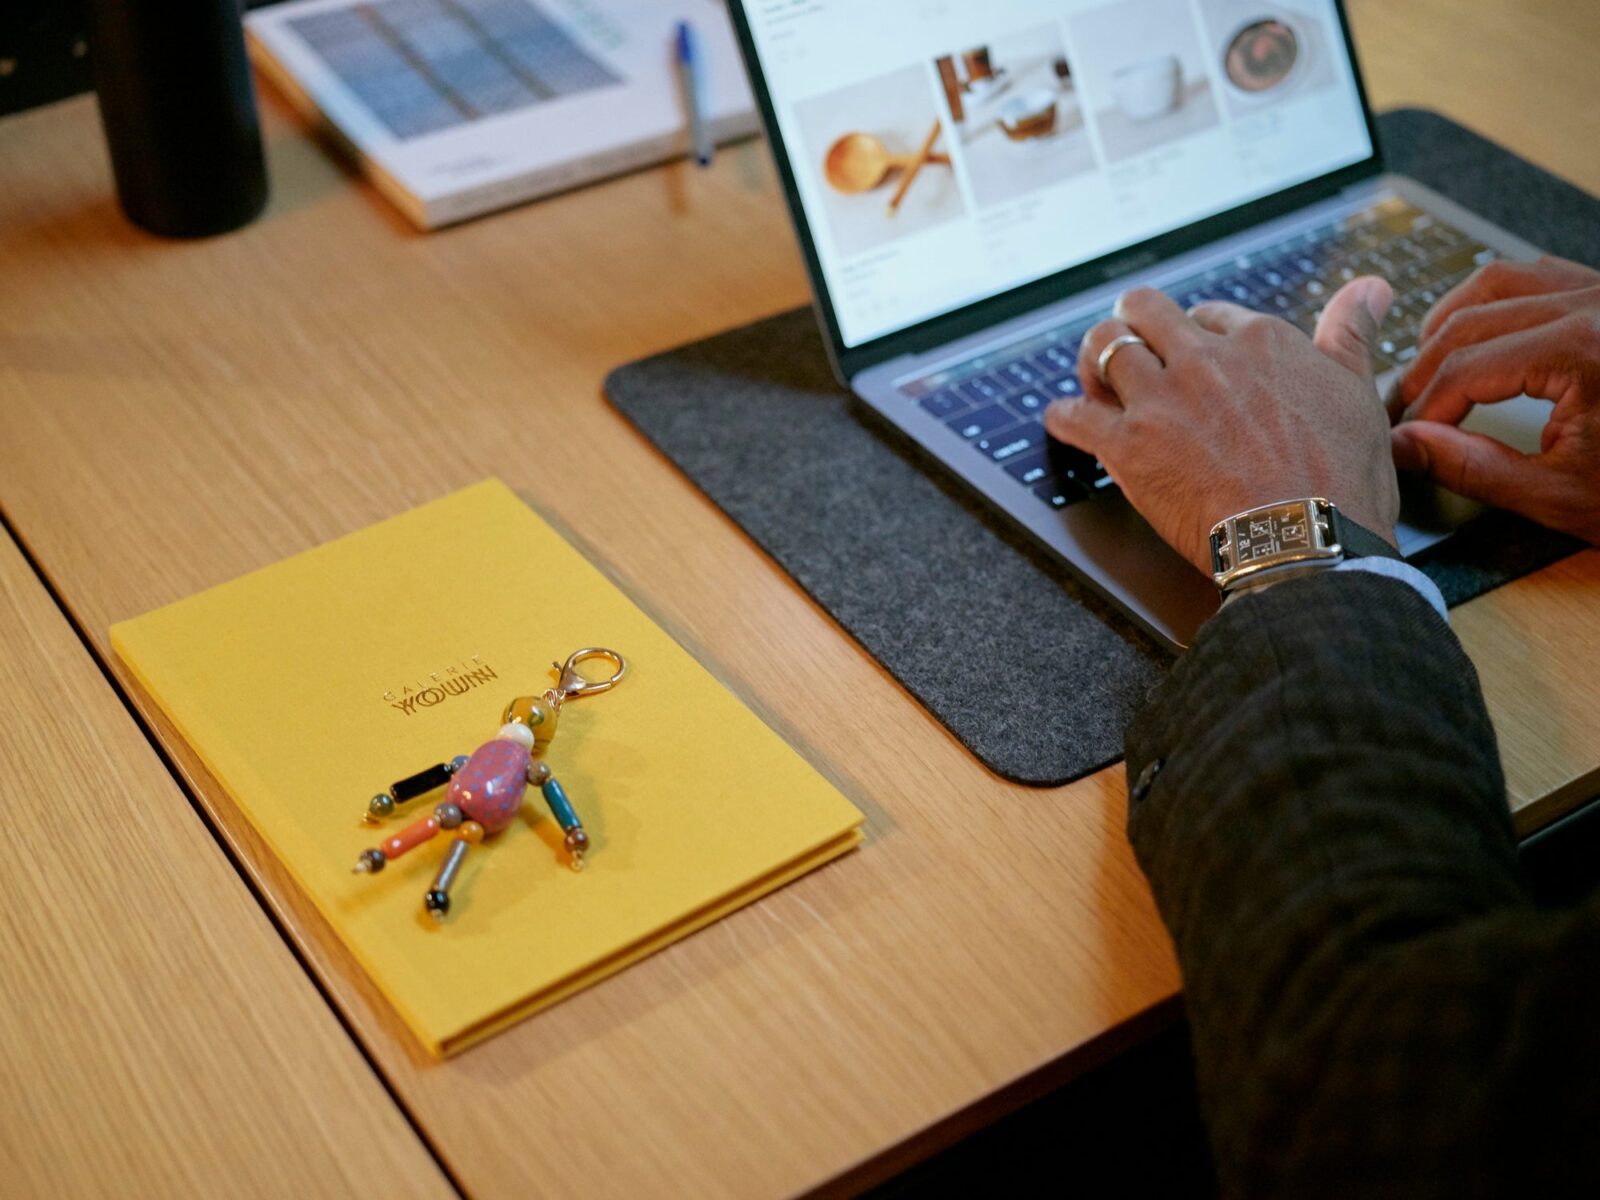 Close up of hands on a computer with a notebook and keychain on the table next to the computer